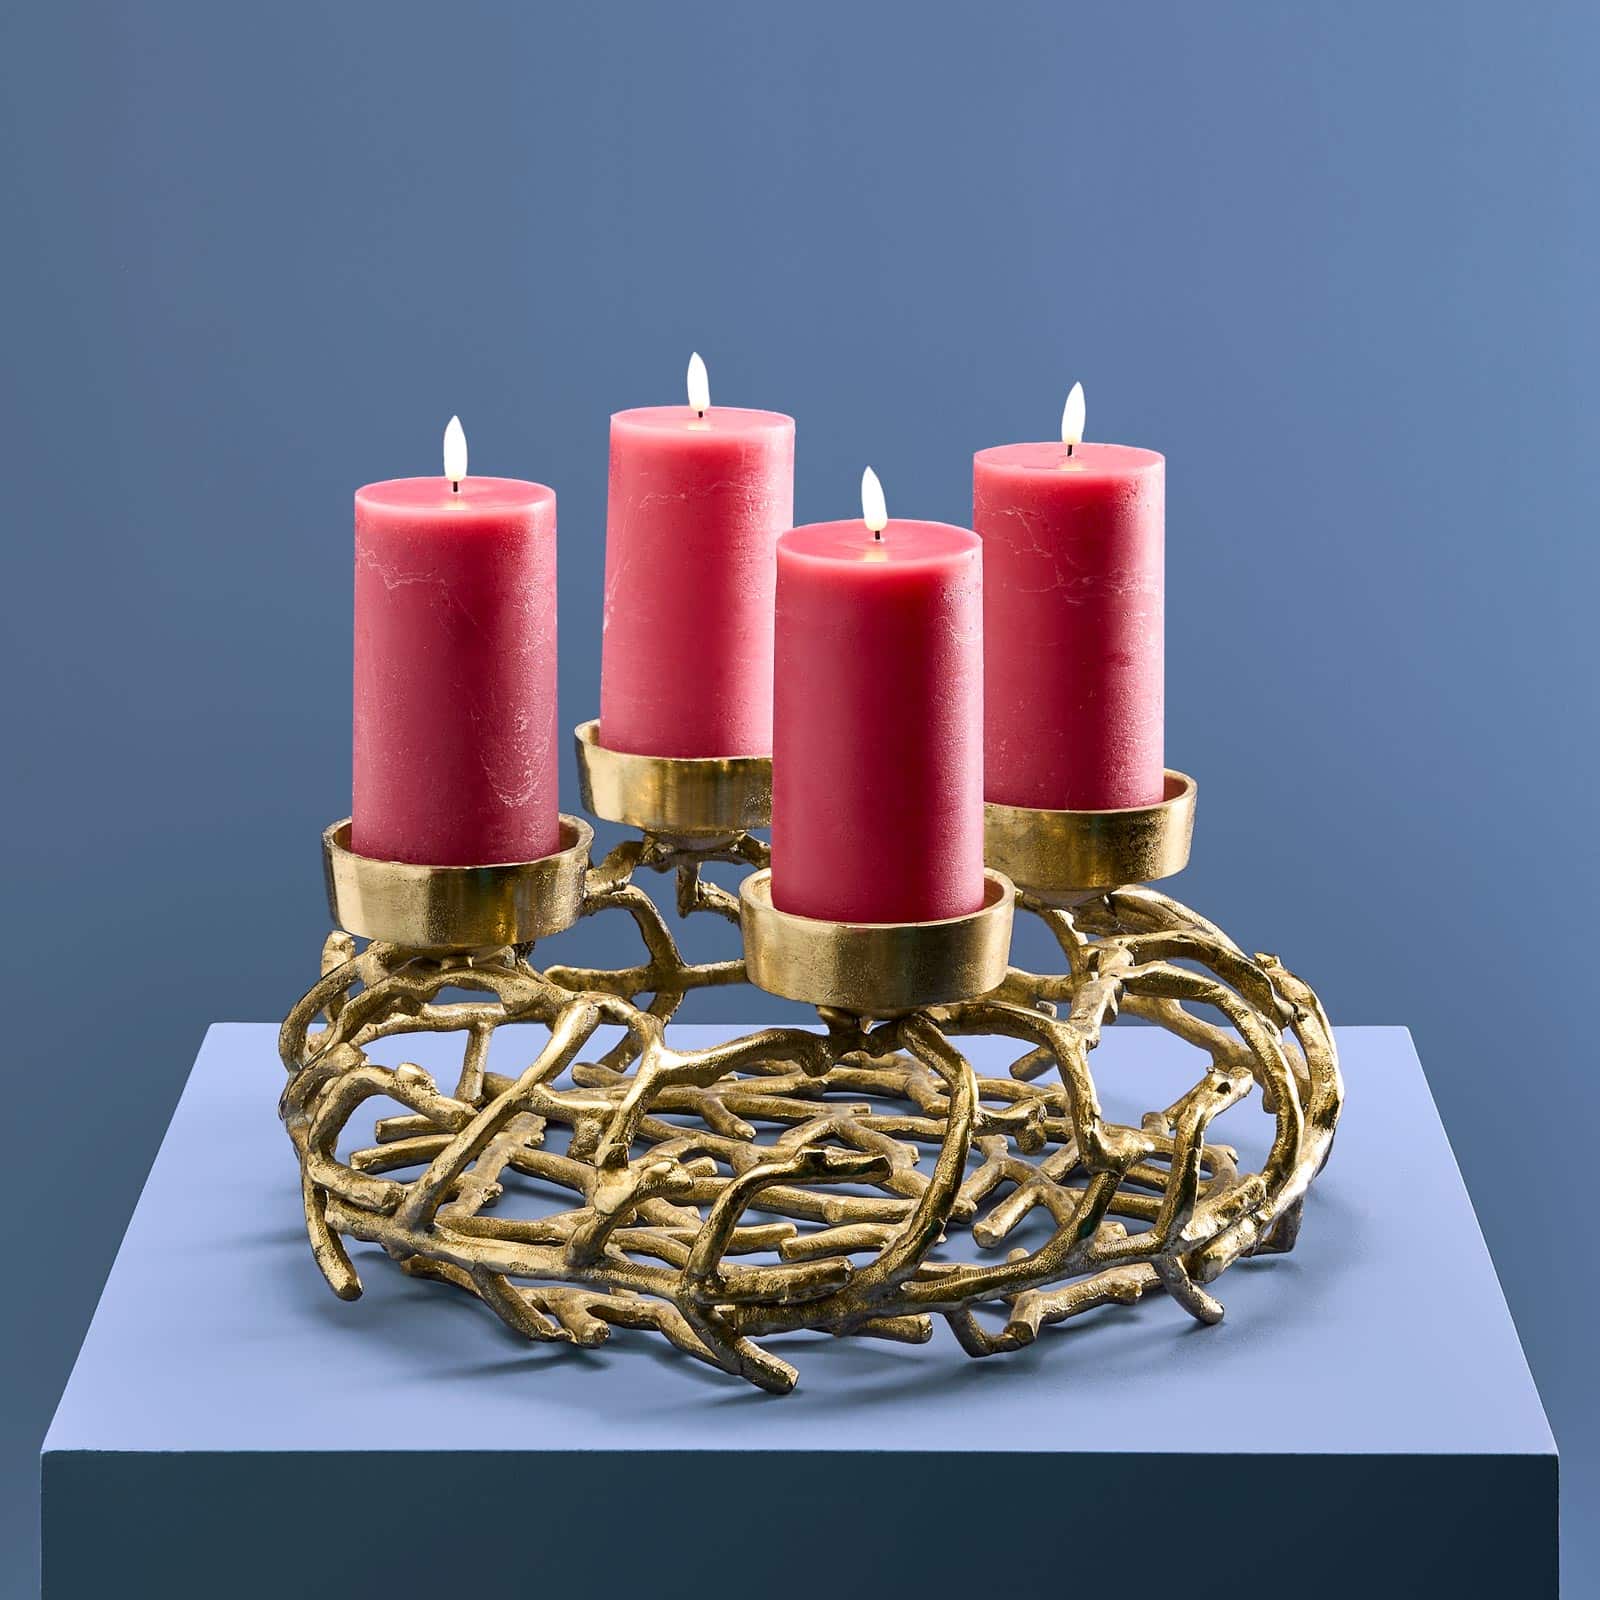 Advent candle holder / Advent wreath with 4 candle holders, gold, aluminum, 39x15 cm